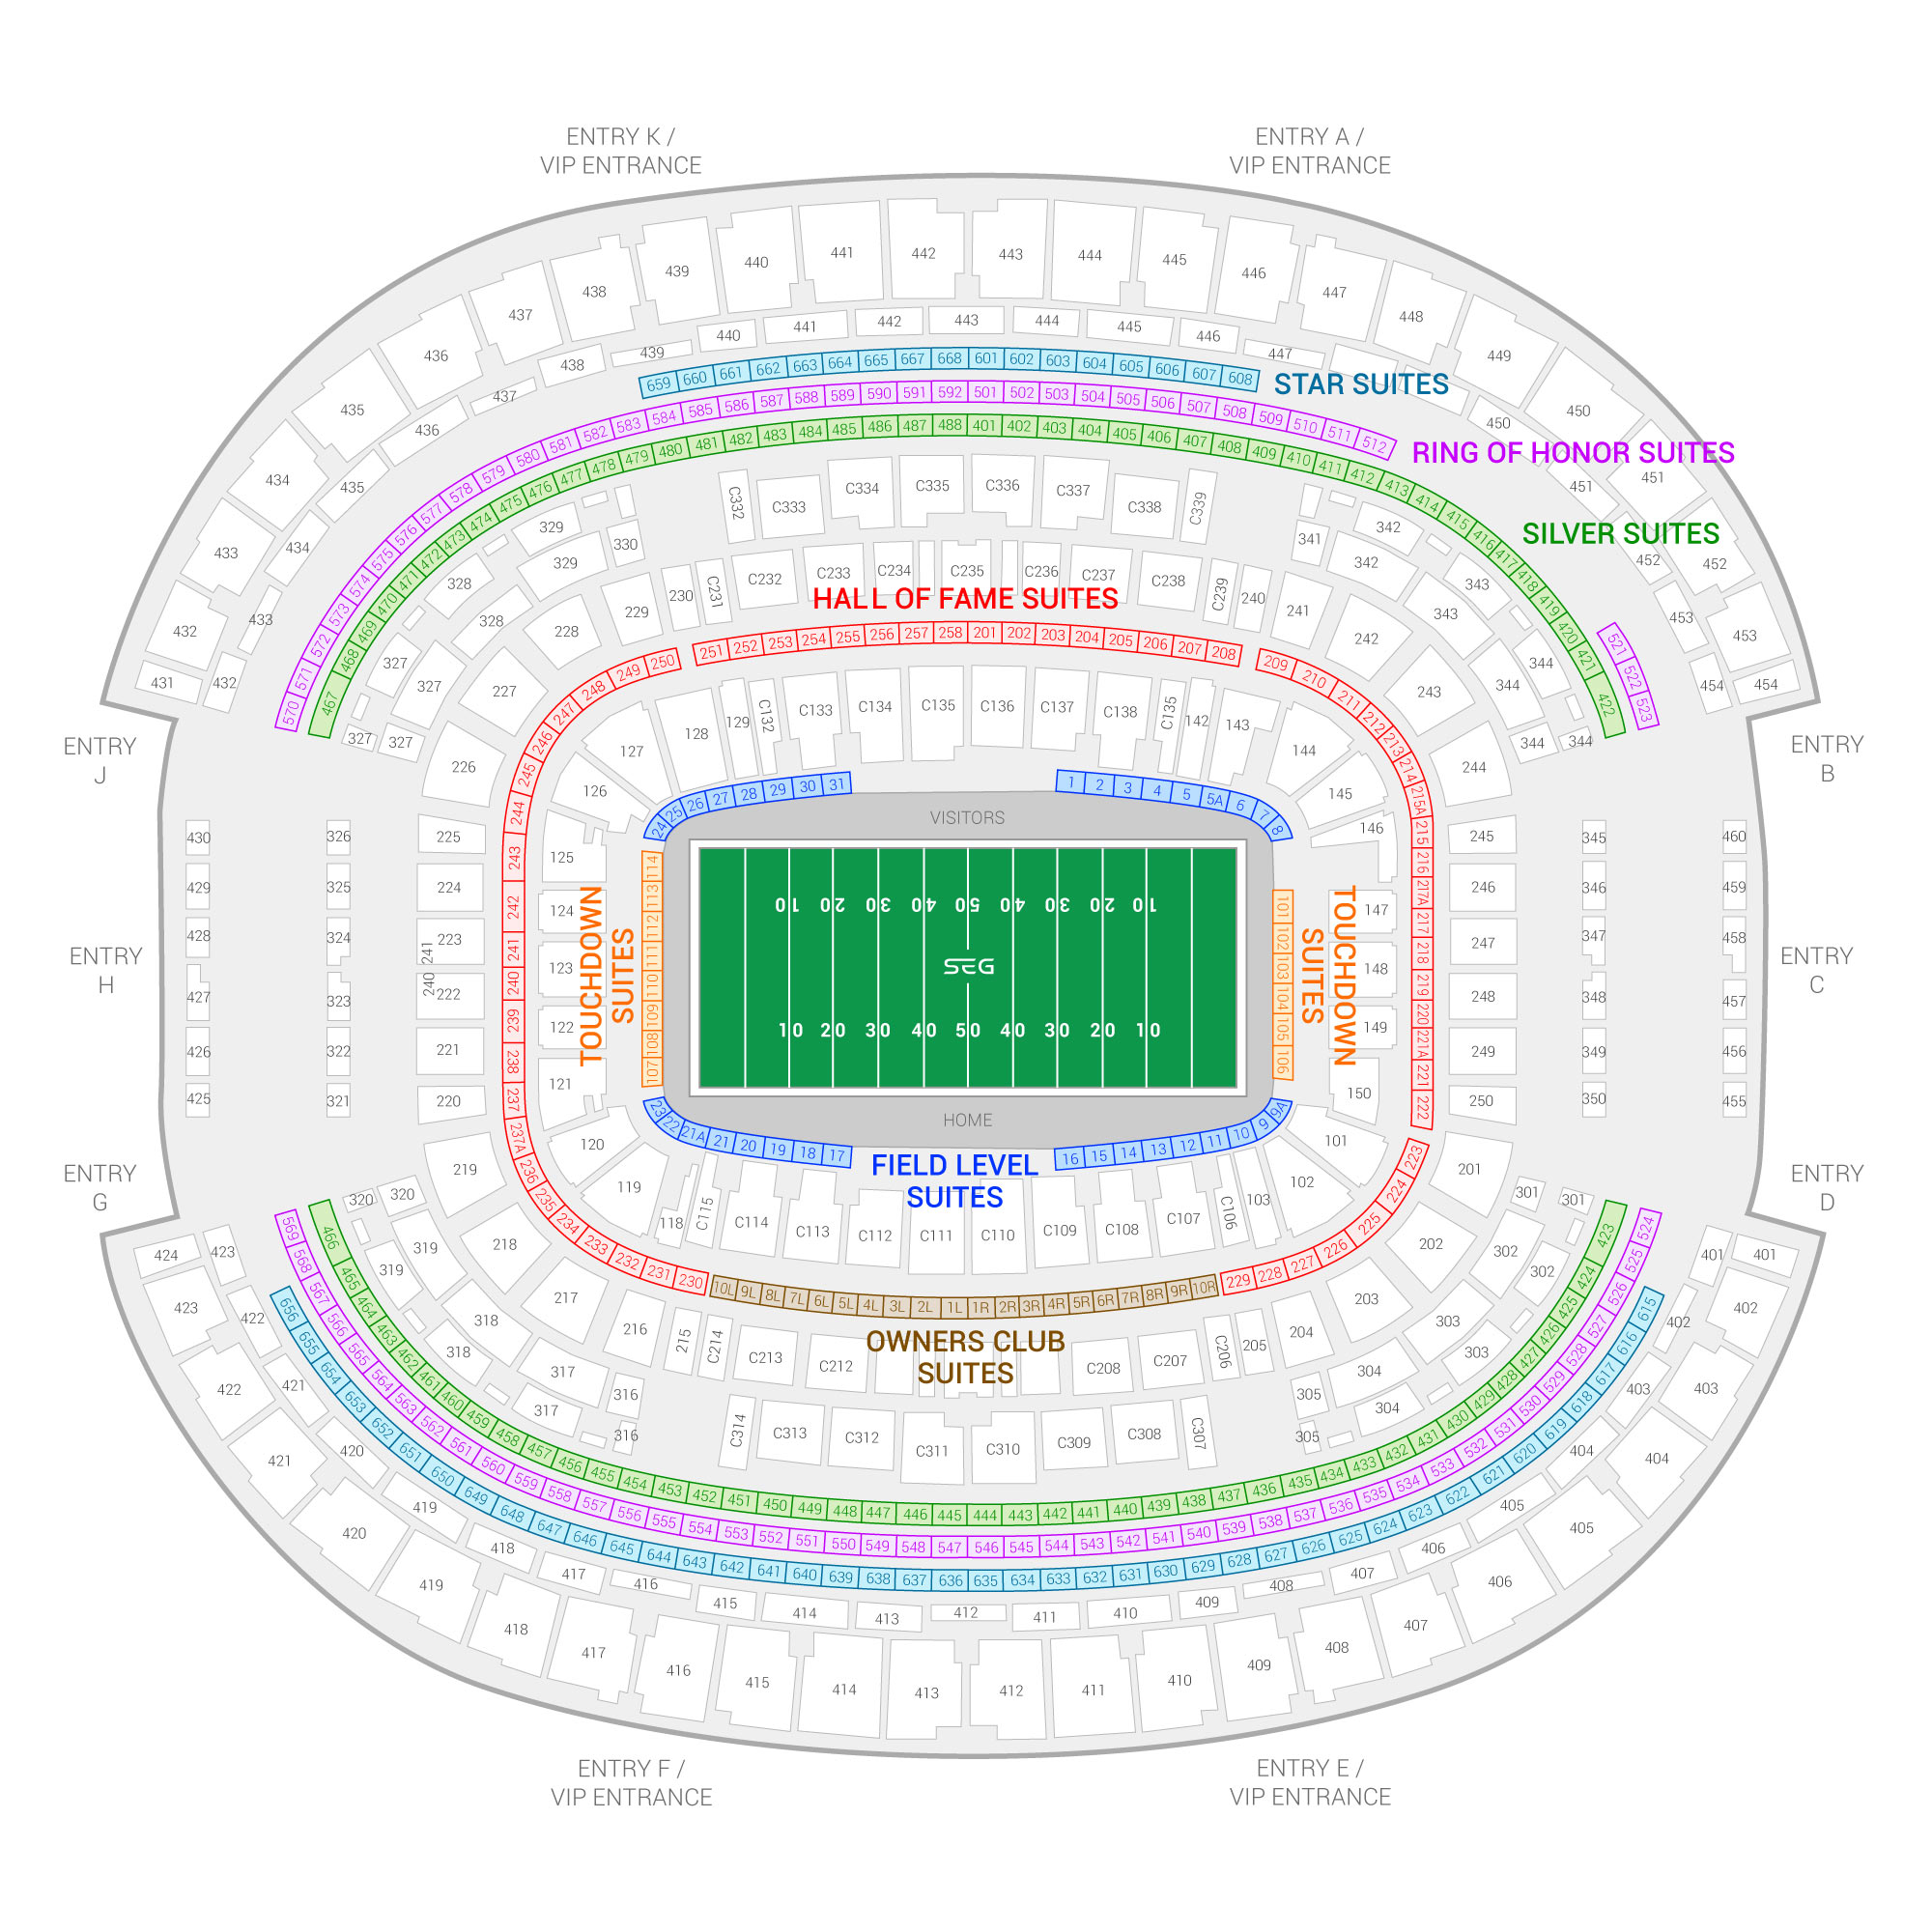 AT&T Stadium / Cotton Bowl Classic Suite Map and Seating Chart